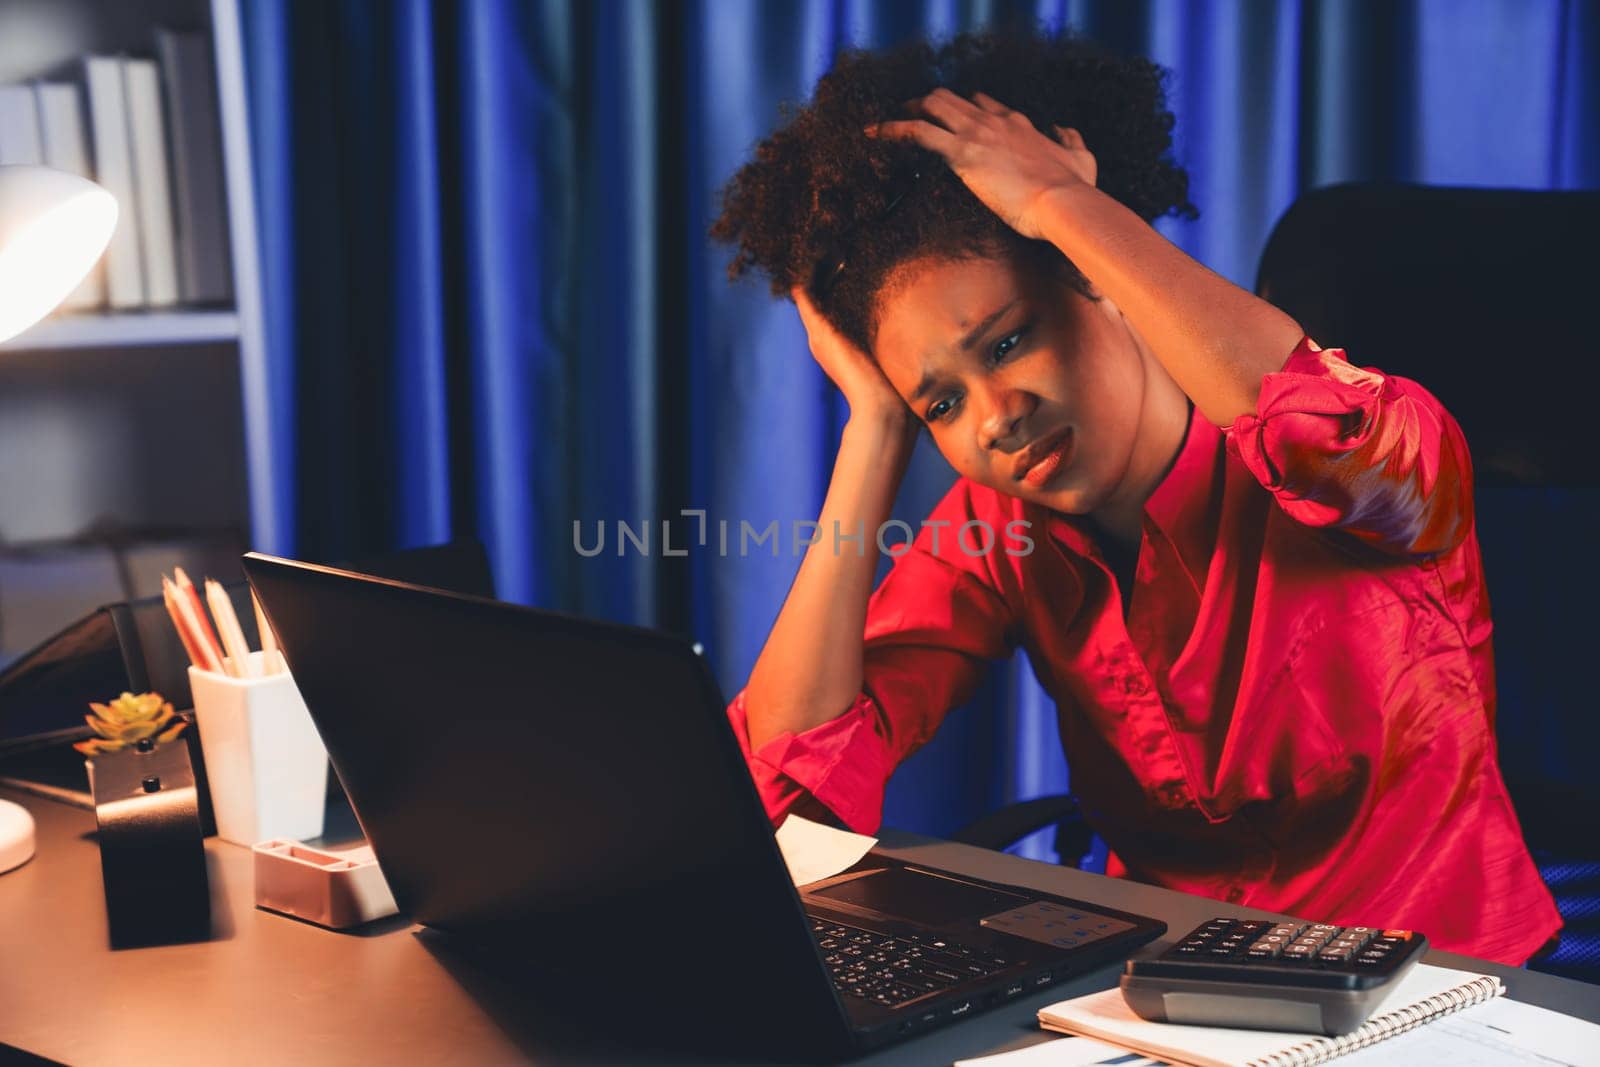 African woman businesswoman, wearing pink shirt having headache with migraine, sitting at computer laptop with leaning position. Concept of work form home with pressure and tension. Tastemaker.